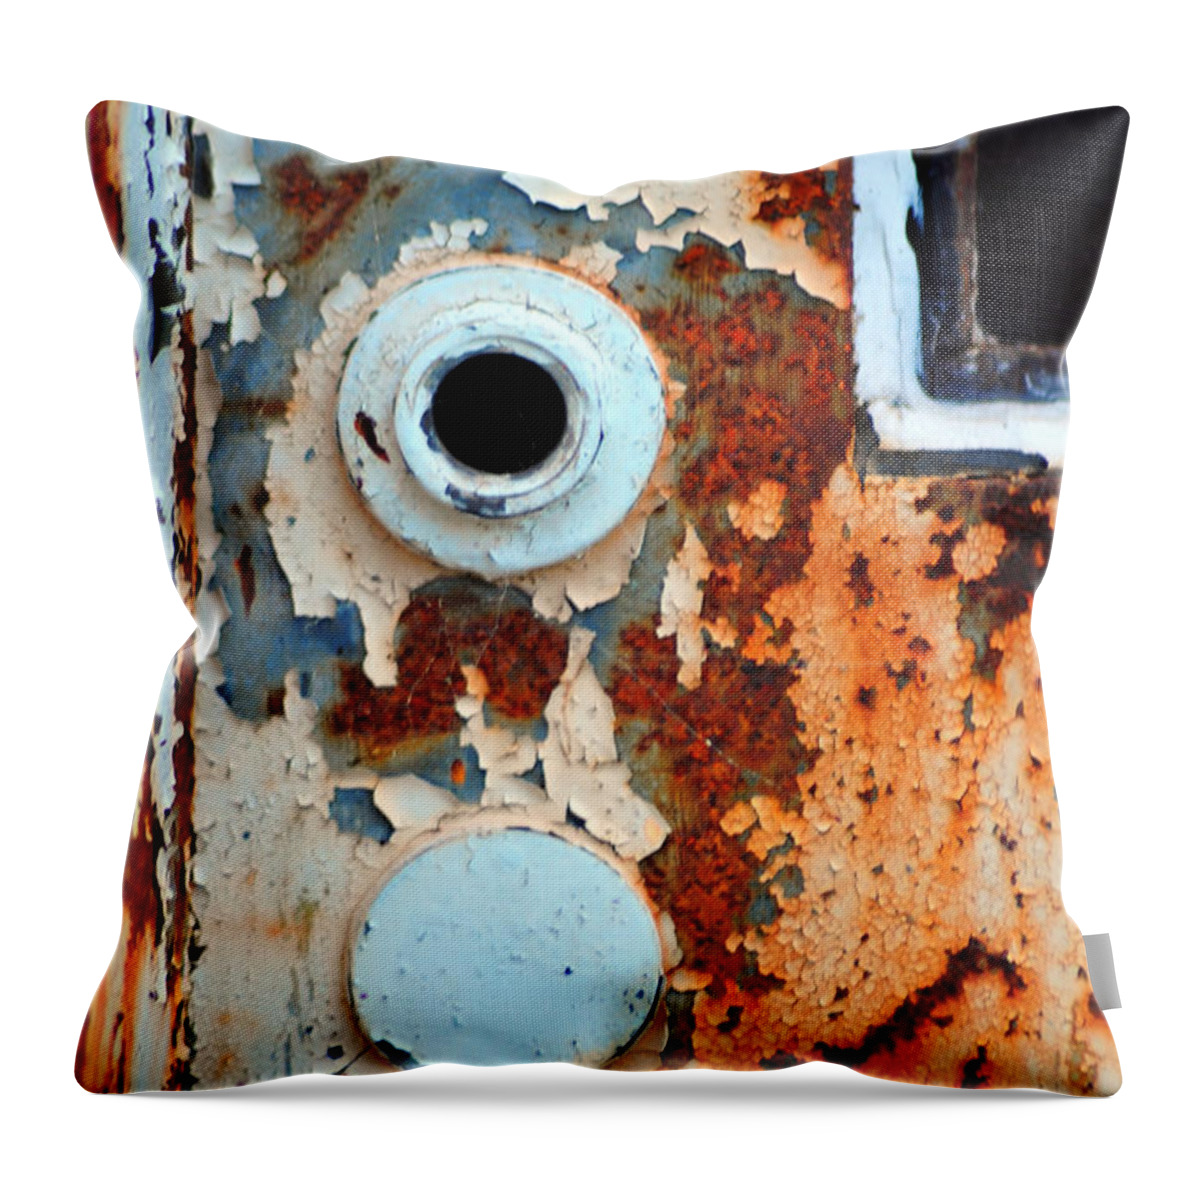 Rusty Throw Pillow featuring the photograph Forever Closed by Randi Grace Nilsberg